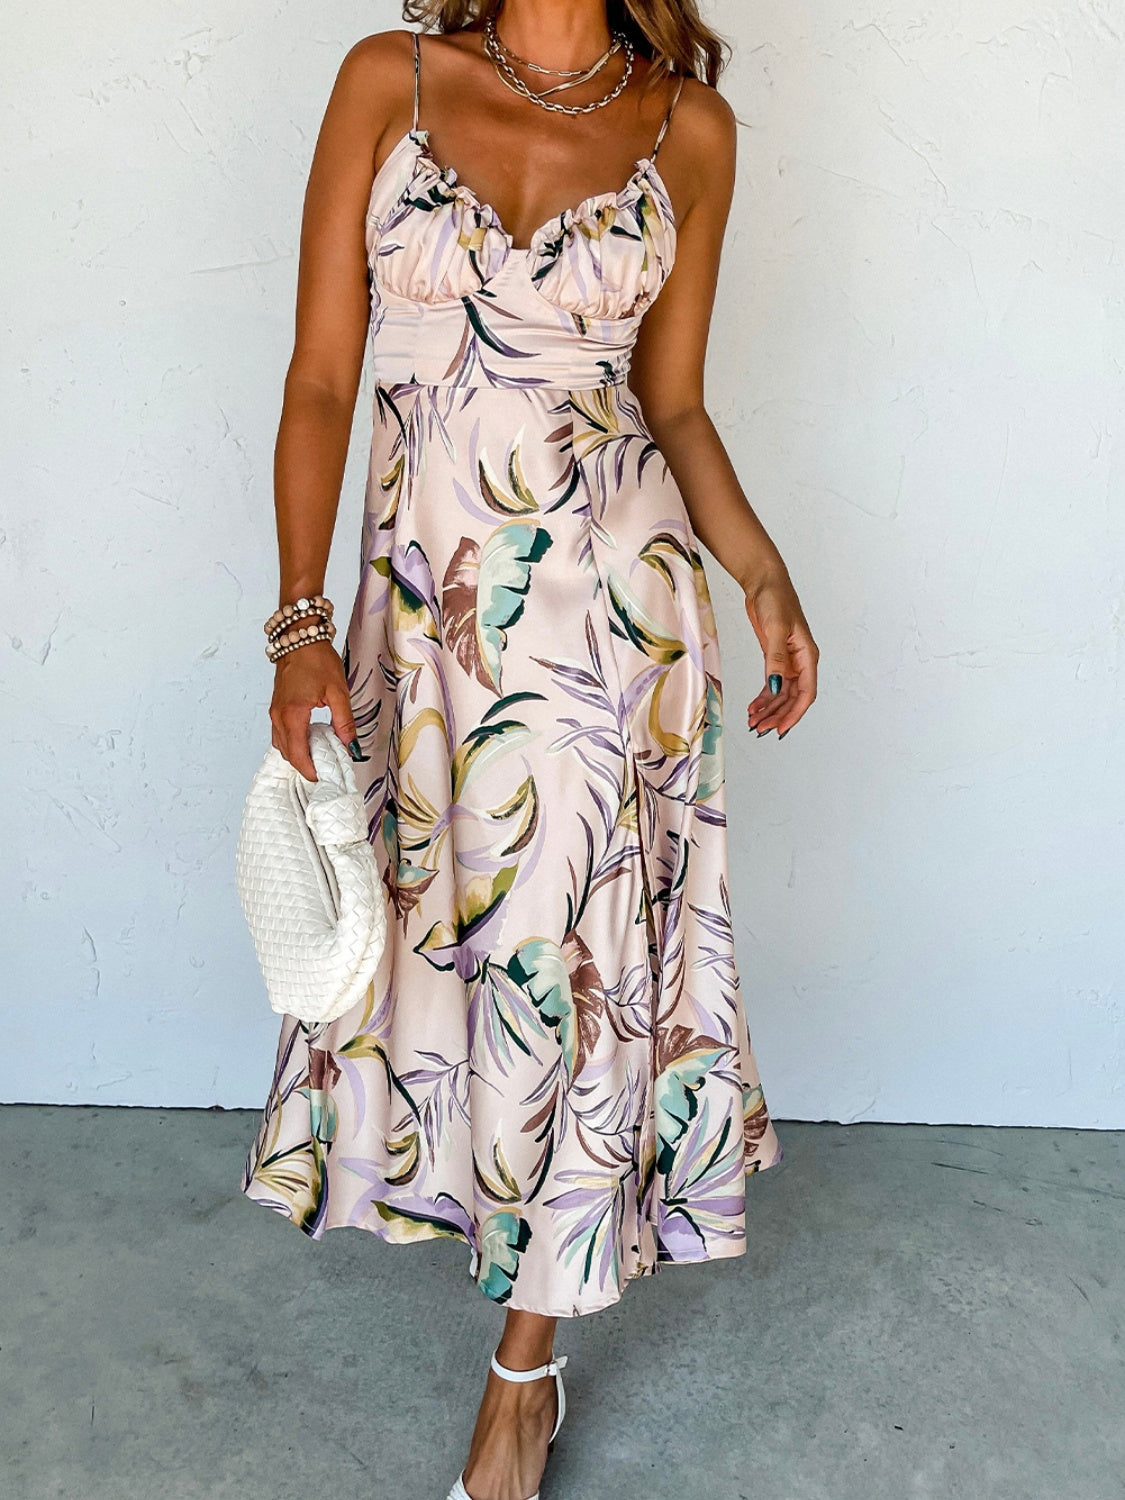 Beach Wedding Guest Midi Dress for Women - Floral Print Cami with Slit and Frills